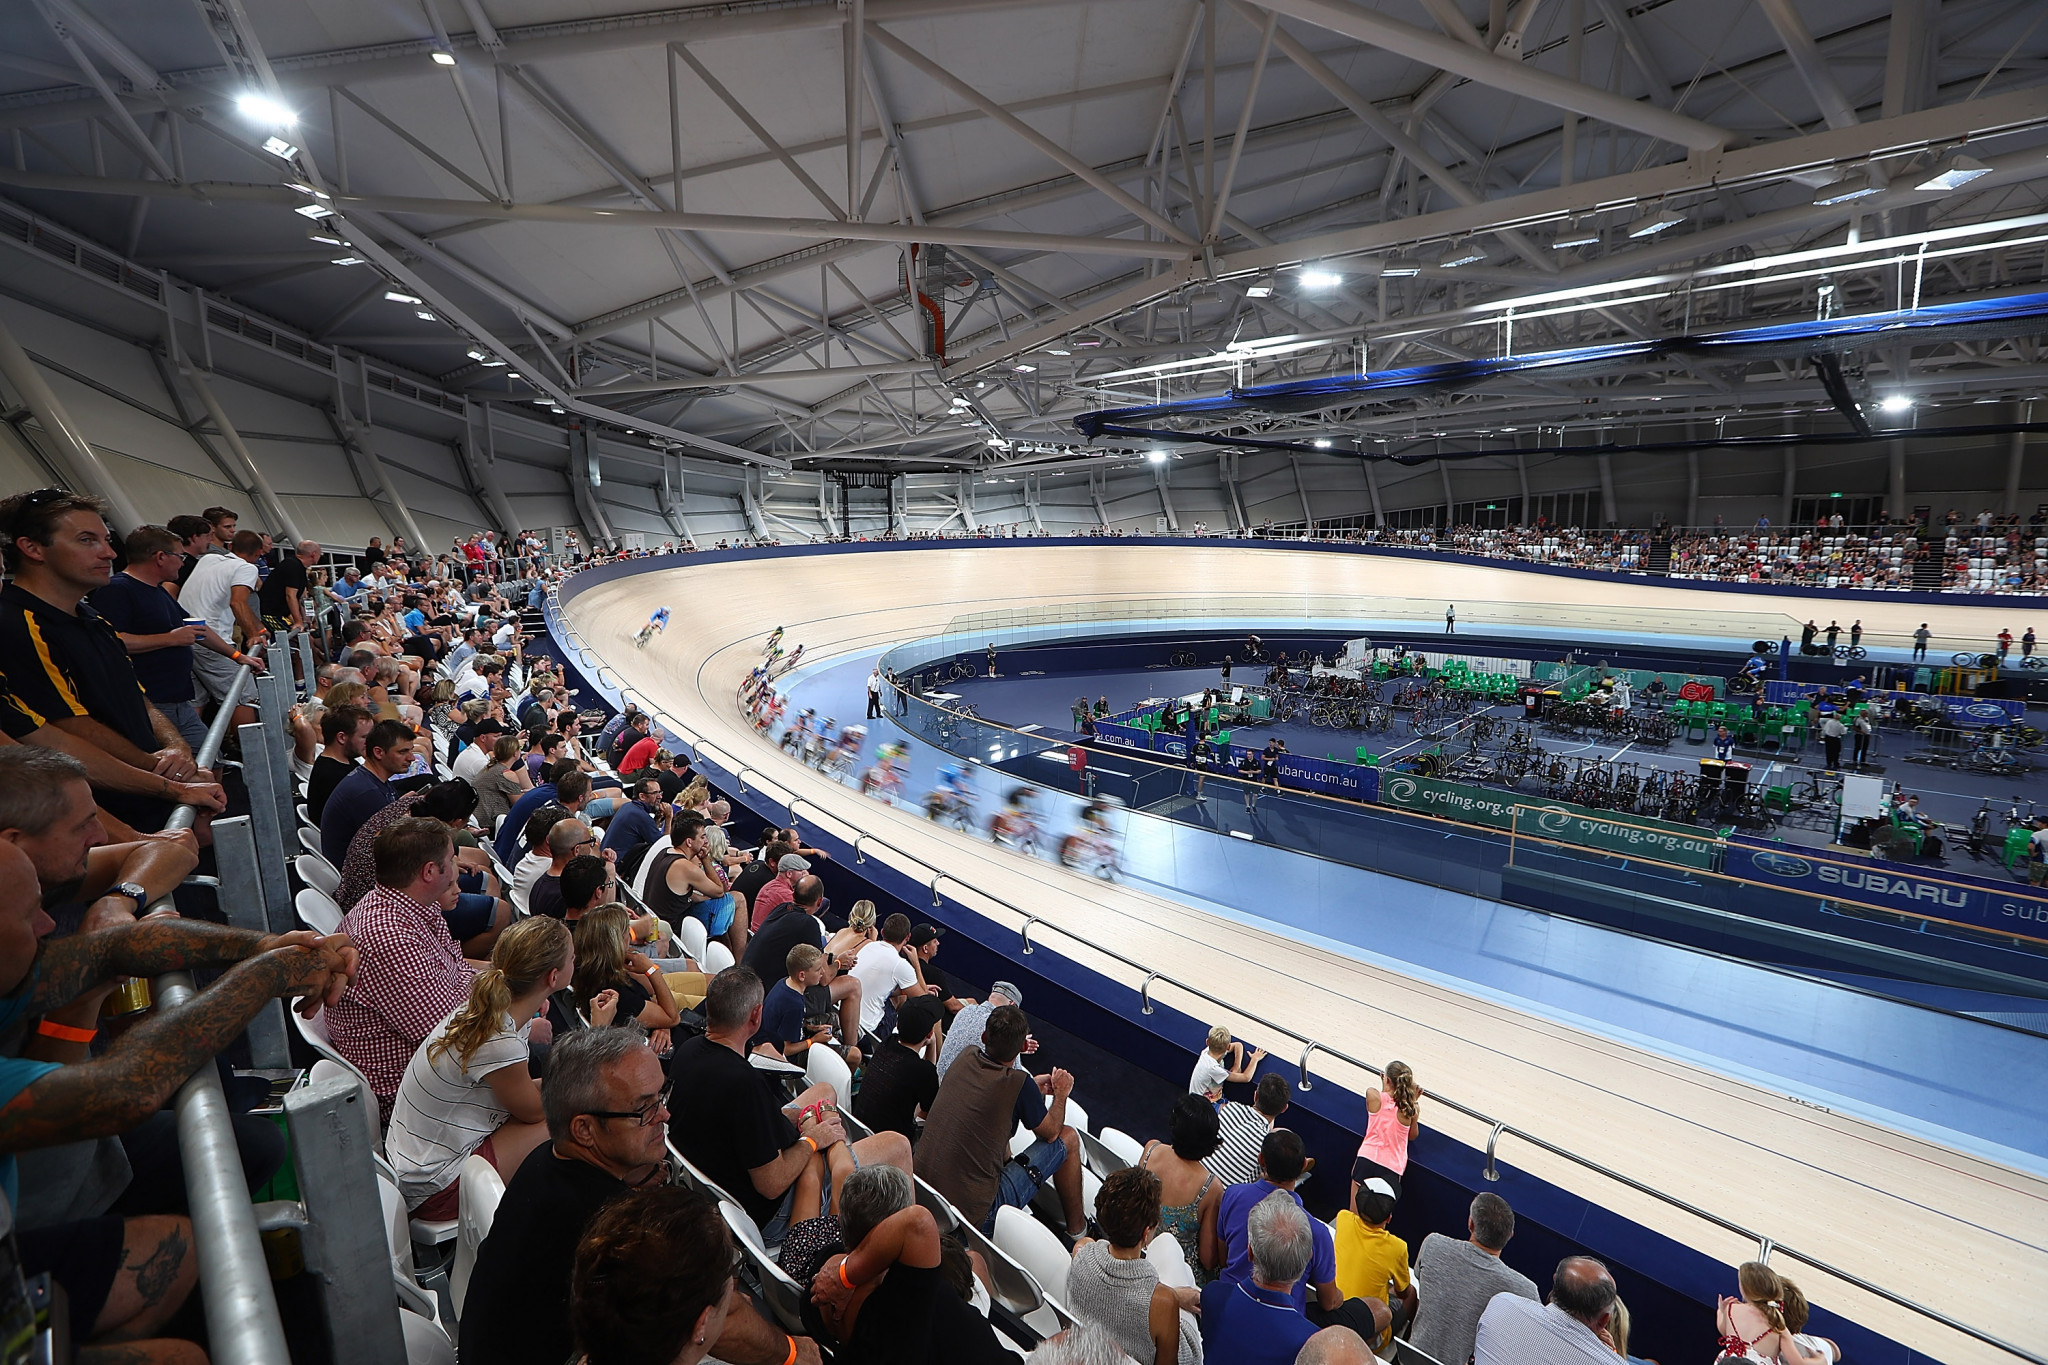 Track cycling competition is set to take place at the Anna Meares Velodrome in Brisbane ©Getty Images